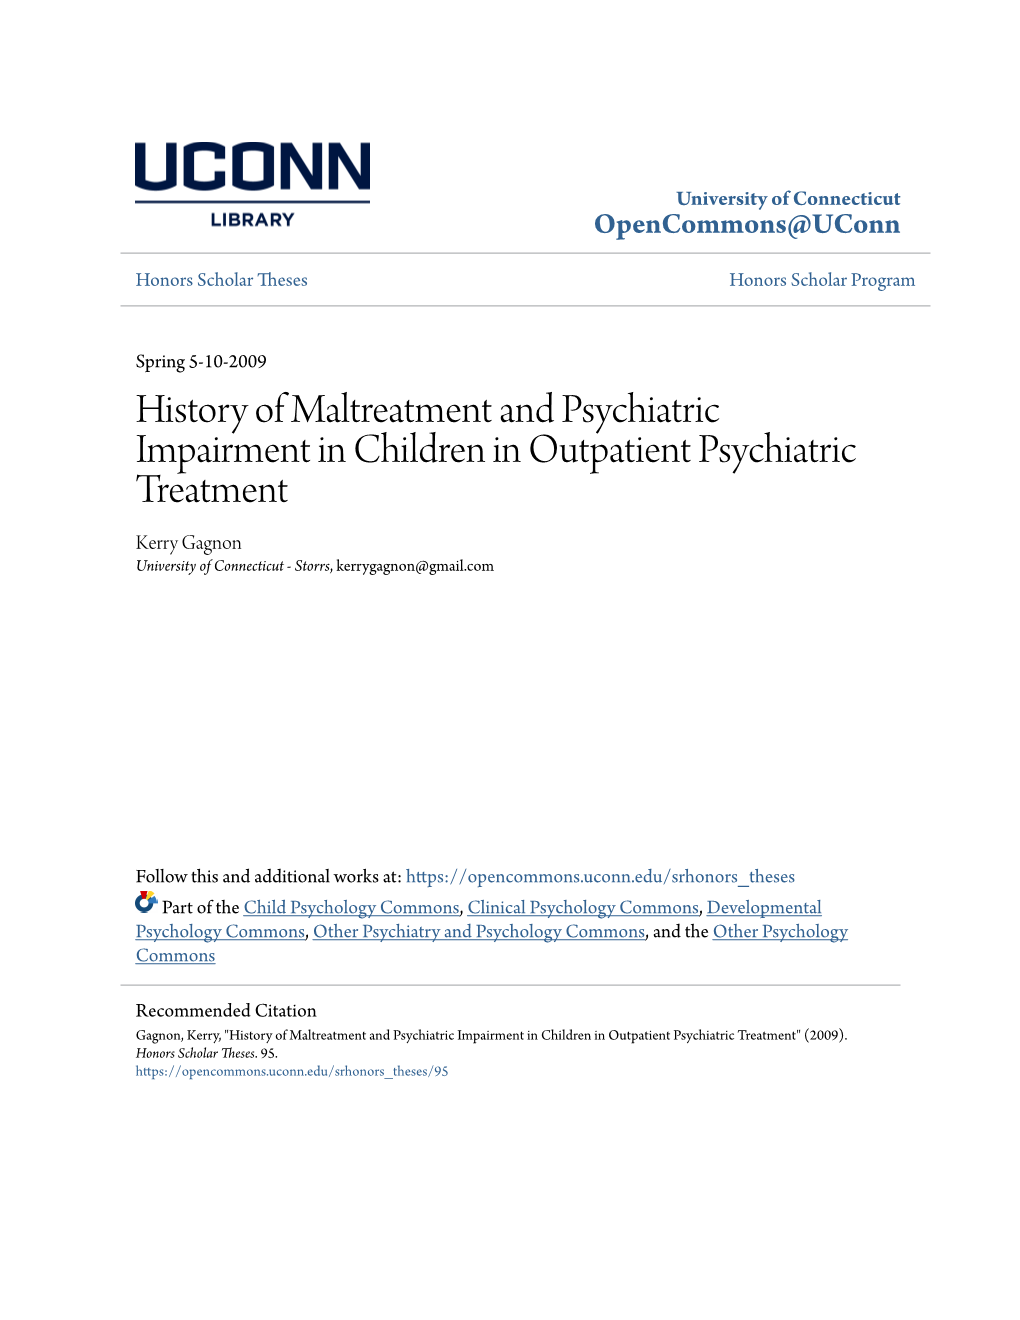 History of Maltreatment and Psychiatric Impairment in Children